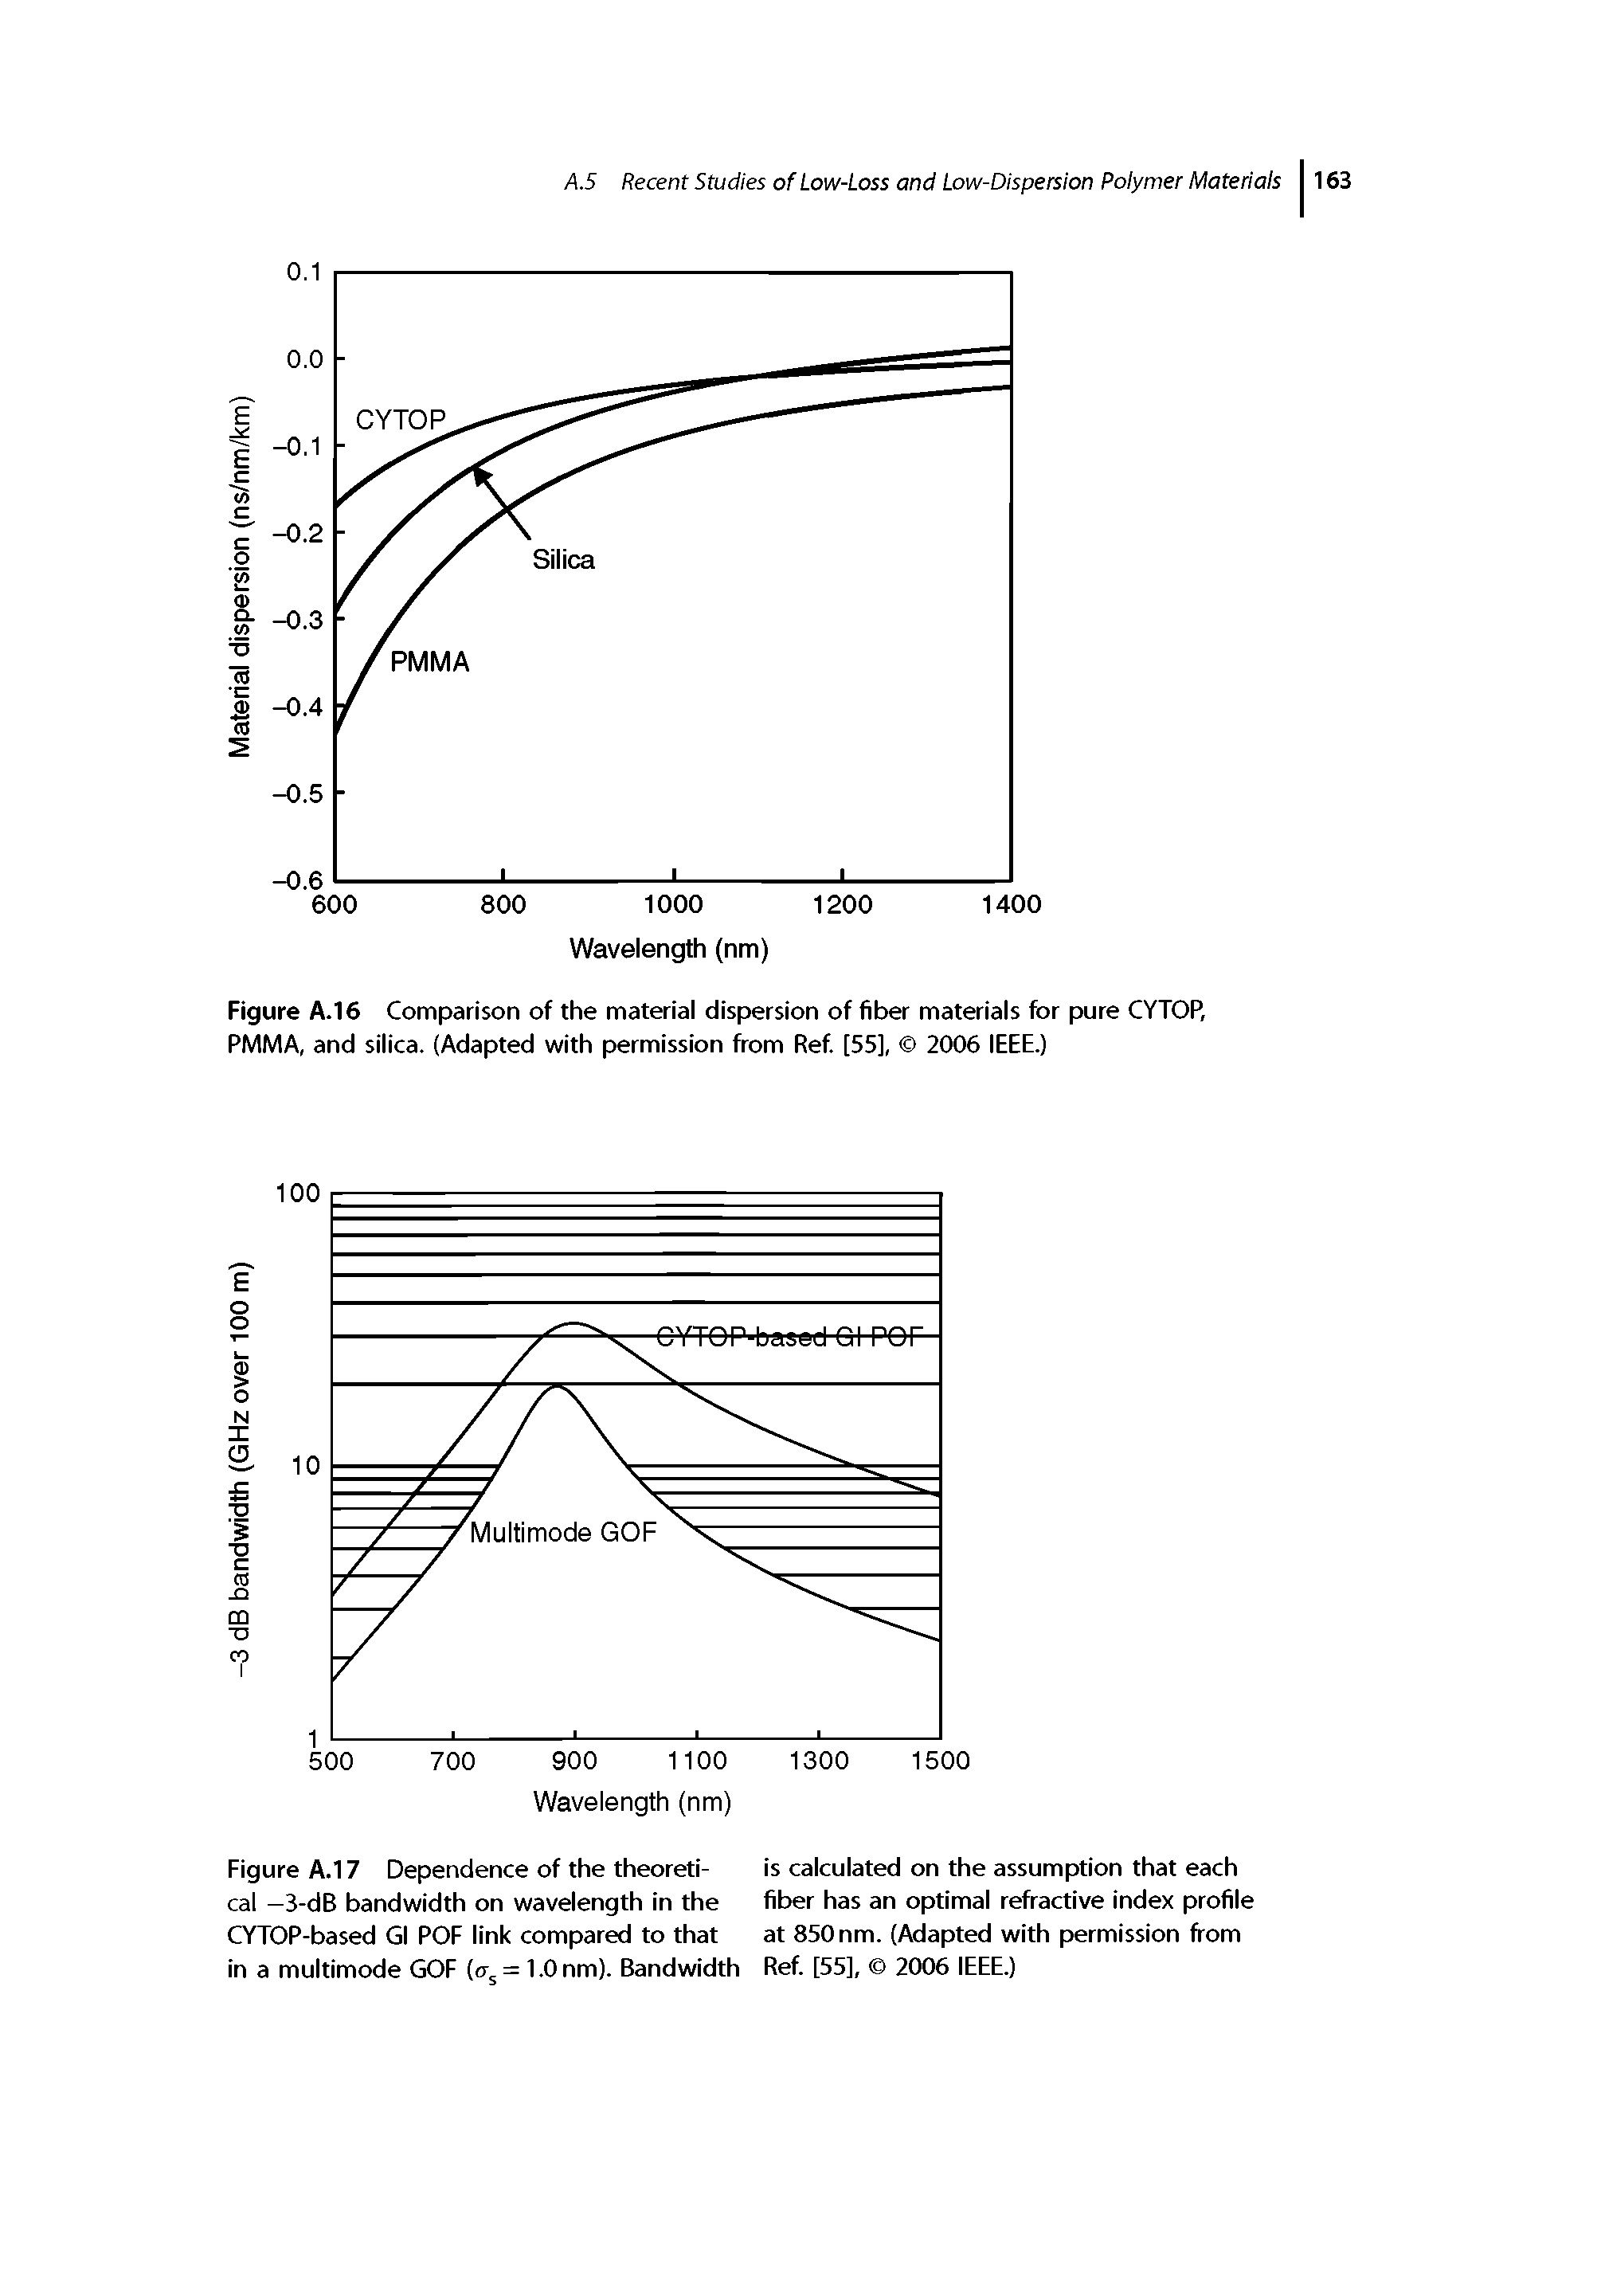 Figure A.16 Comparison of the material dispersion of fiber materials for pure CYTOP, PMMA, and silica. (Adapted with permission from Ref [55], 2006 IEEE.)...